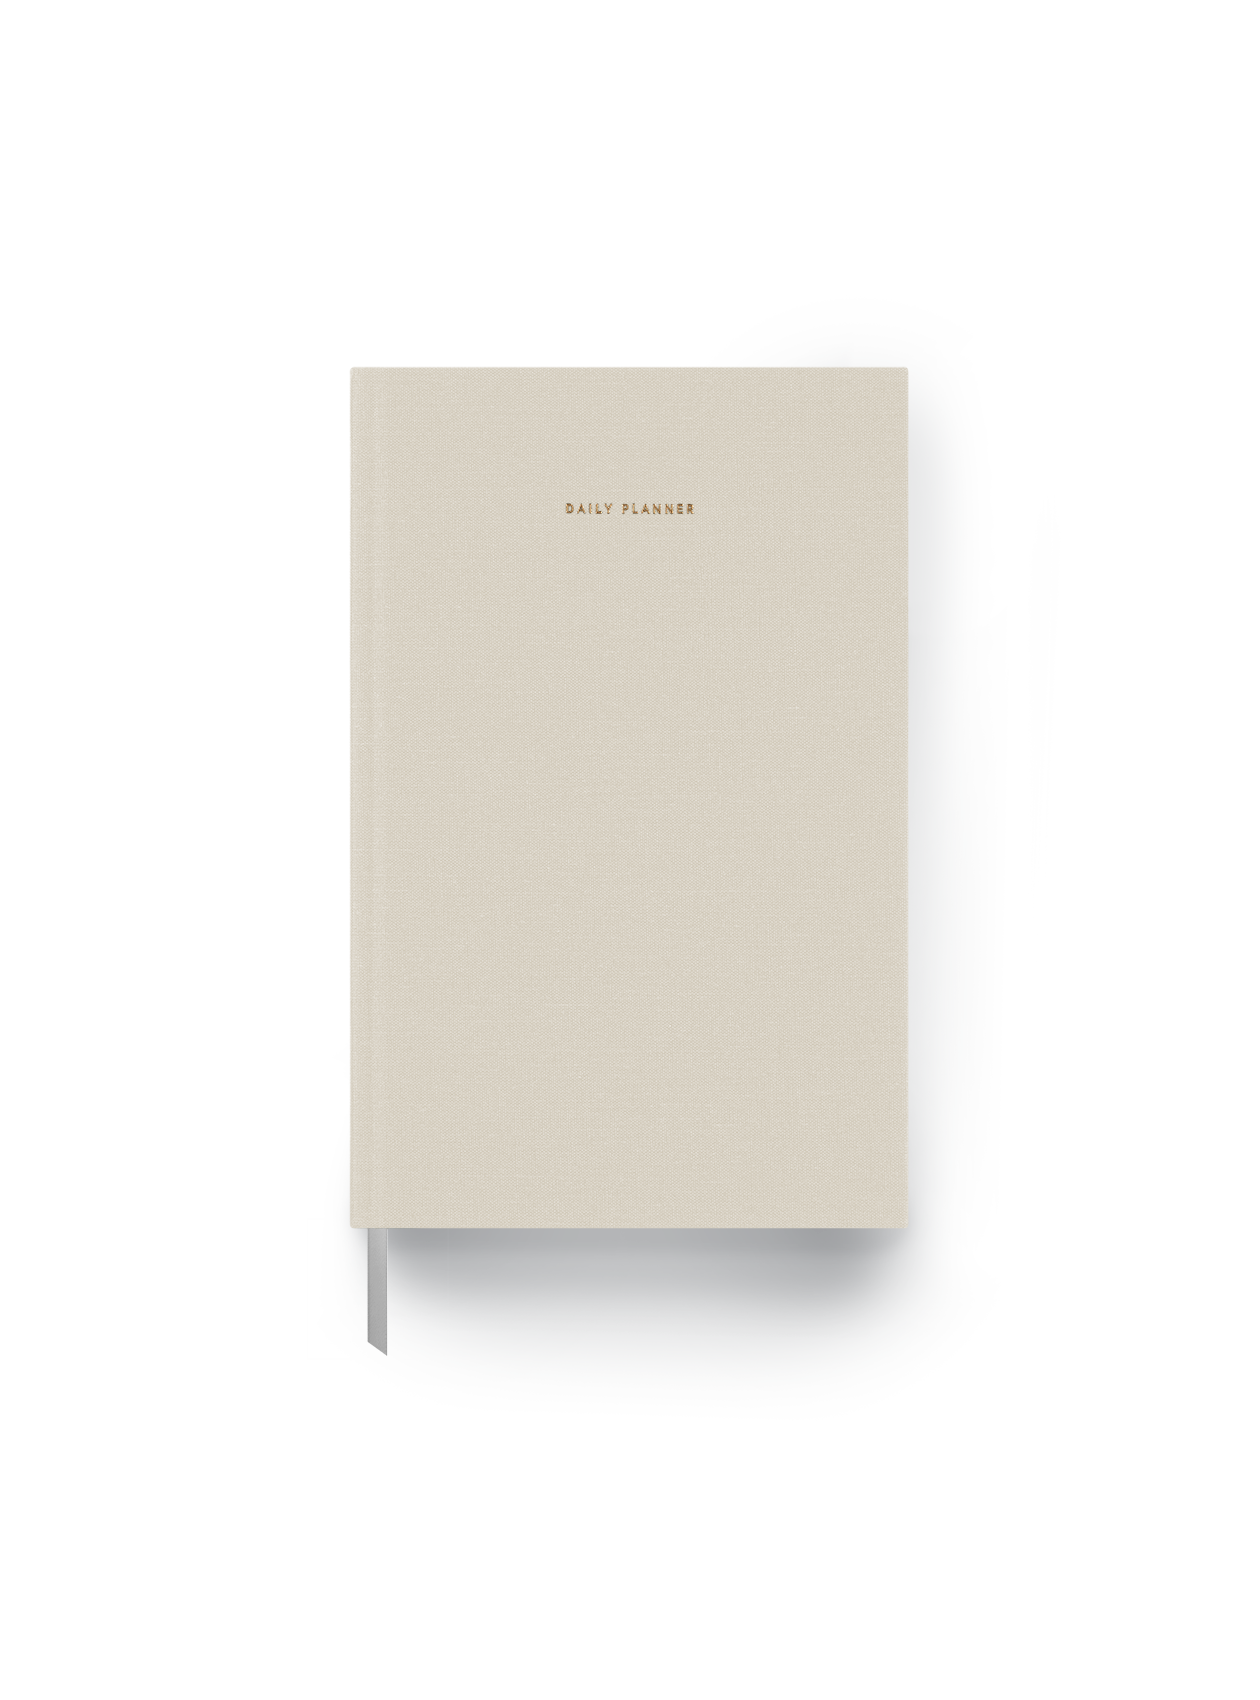 The Appointed 24-25 Daily Planner in Natural Linen with casebound hardcover and gold foil details || Natural Linen